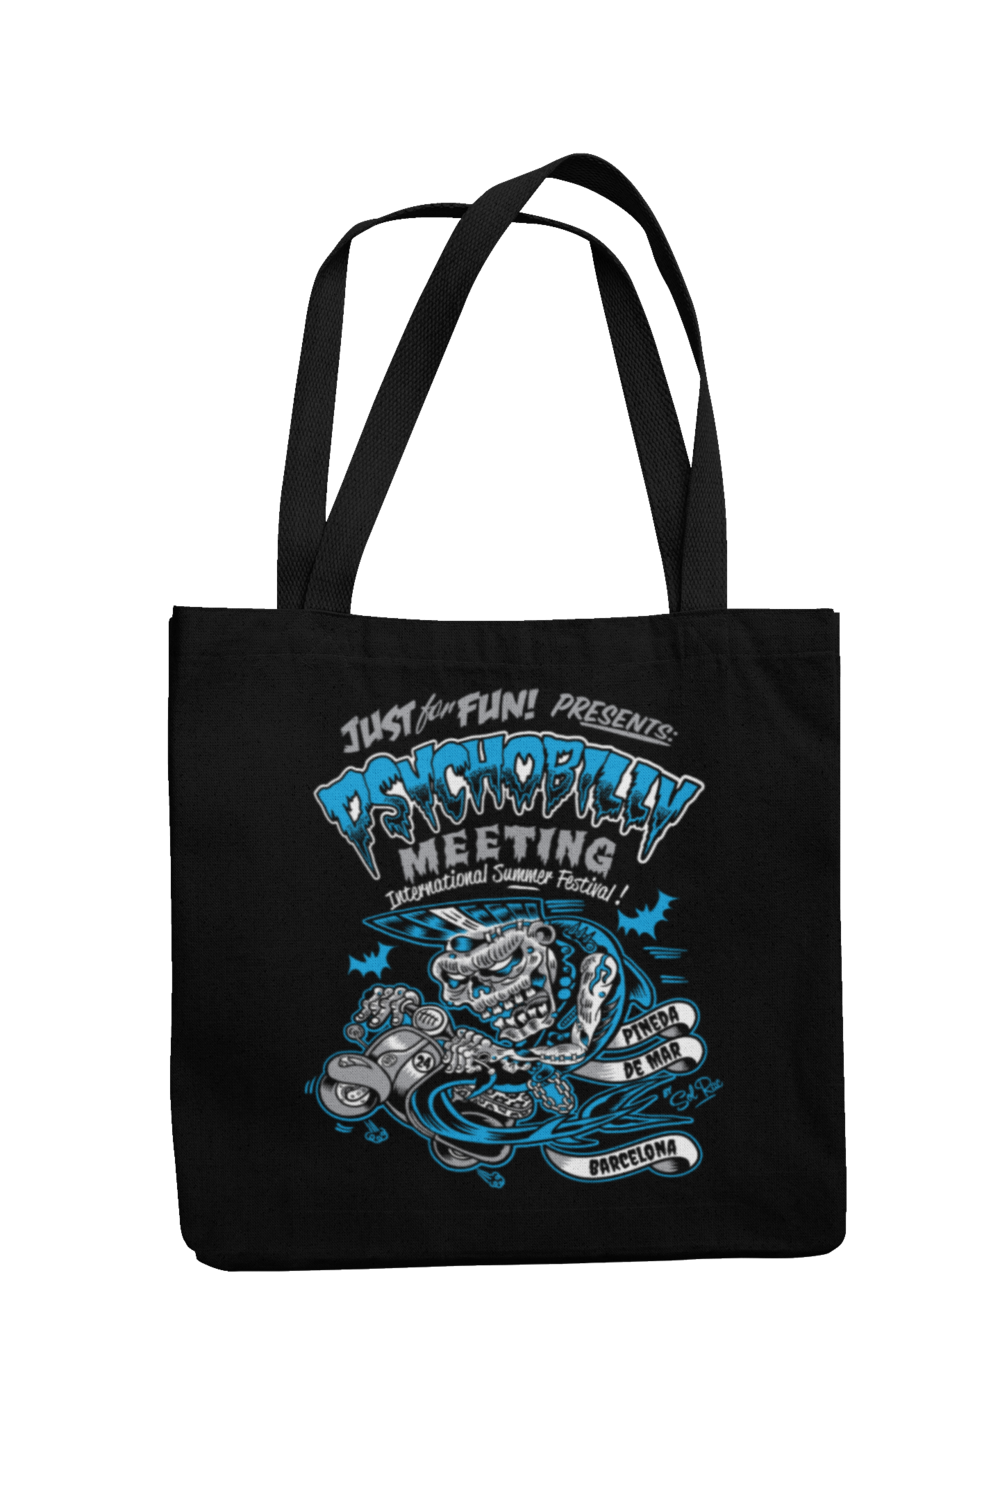 Cotton Bag Psychobilly meeting design by Solrac 2016